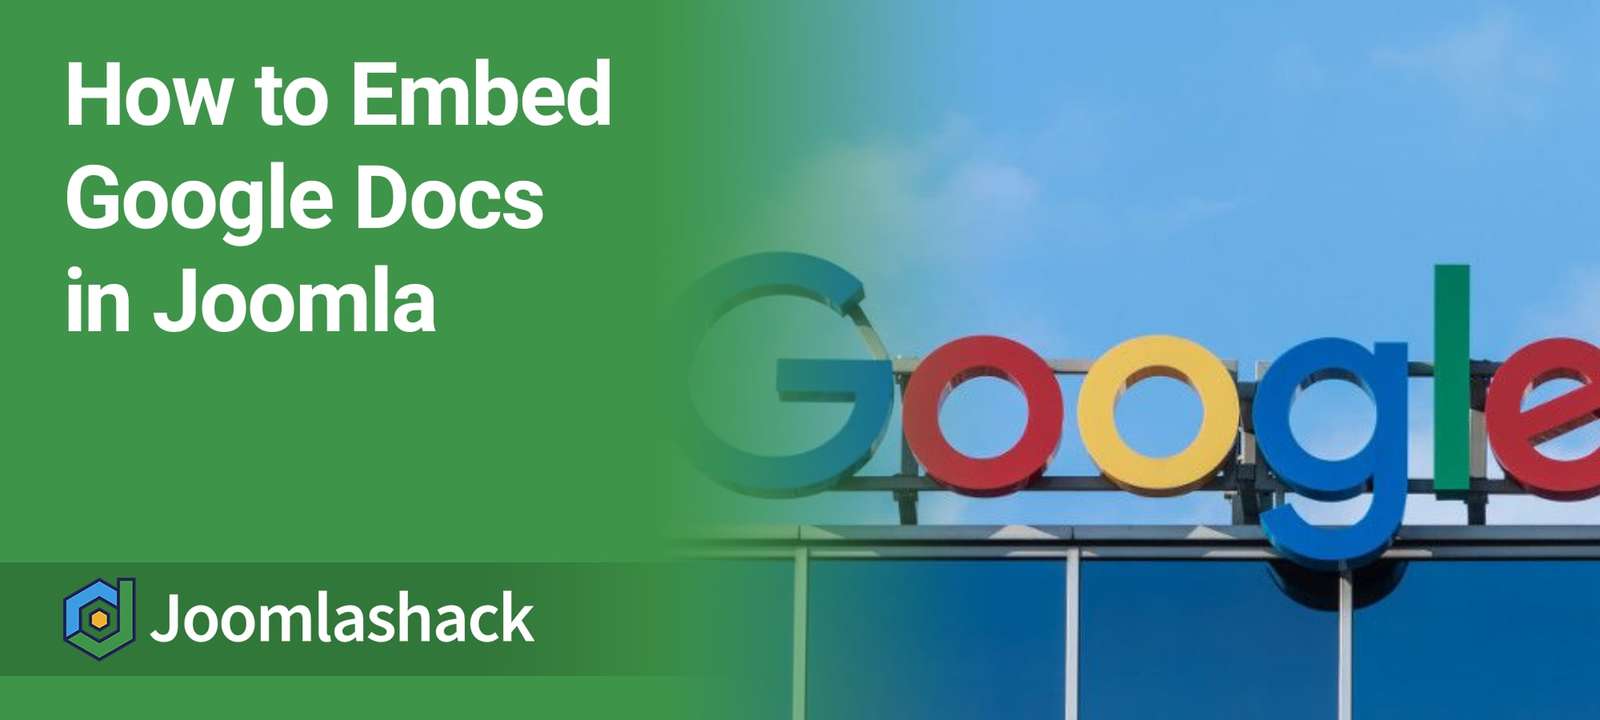 How to Embed Google Docs in JoomlaHow to Embed Google Docs in Joomla